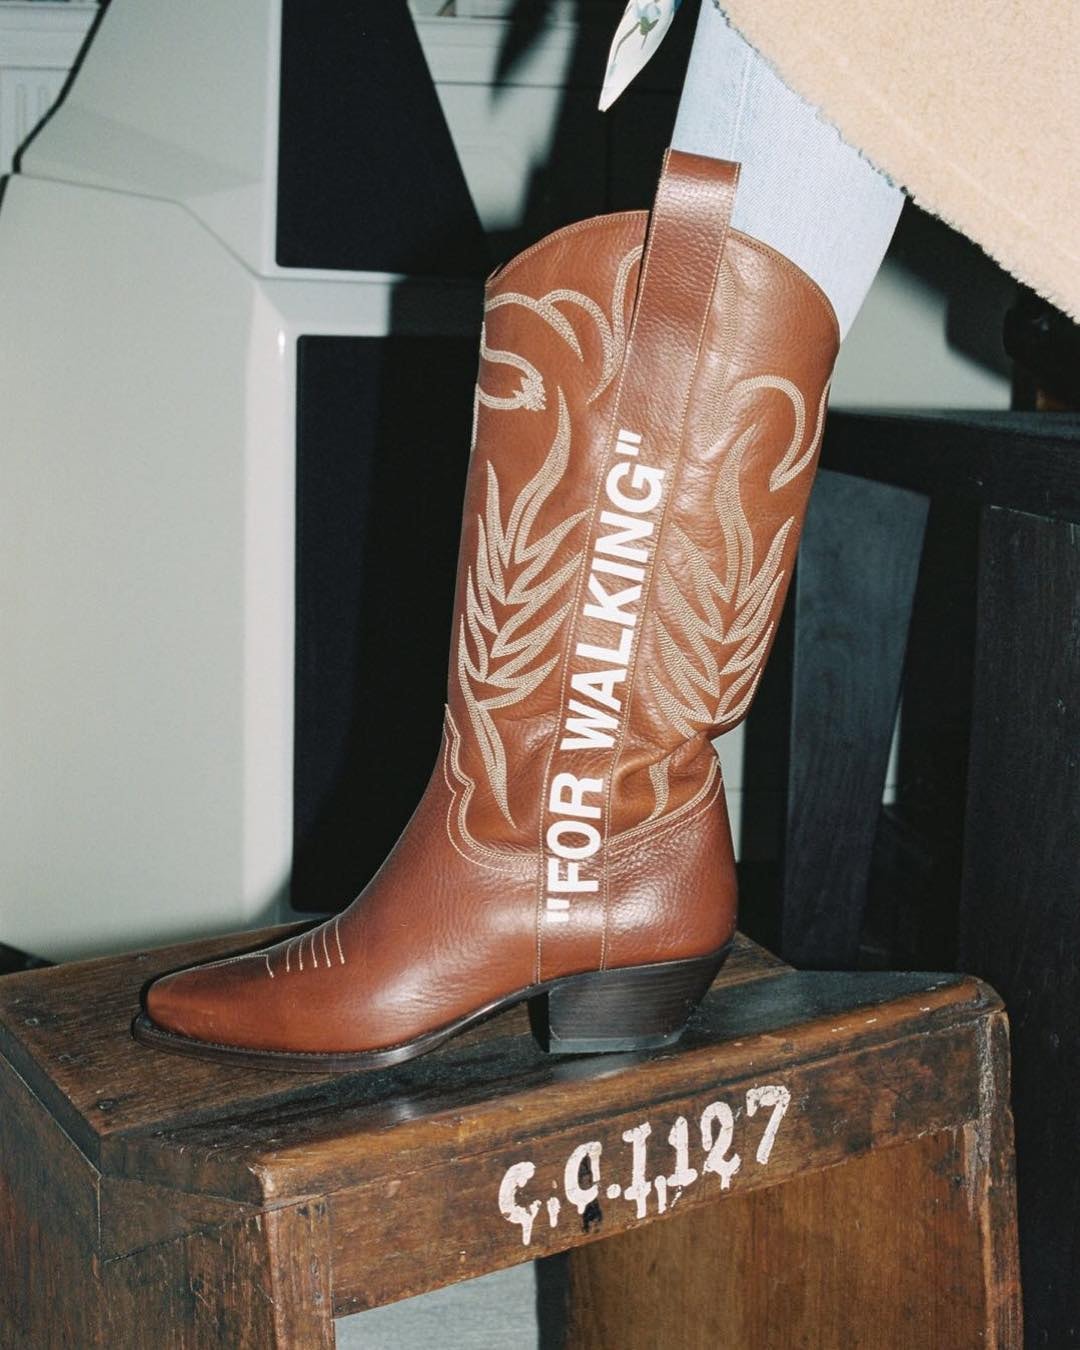 Off-White™ "FOR WALKING" Cowboy Boots in Brown Virgil Abloh Wild West Fashion